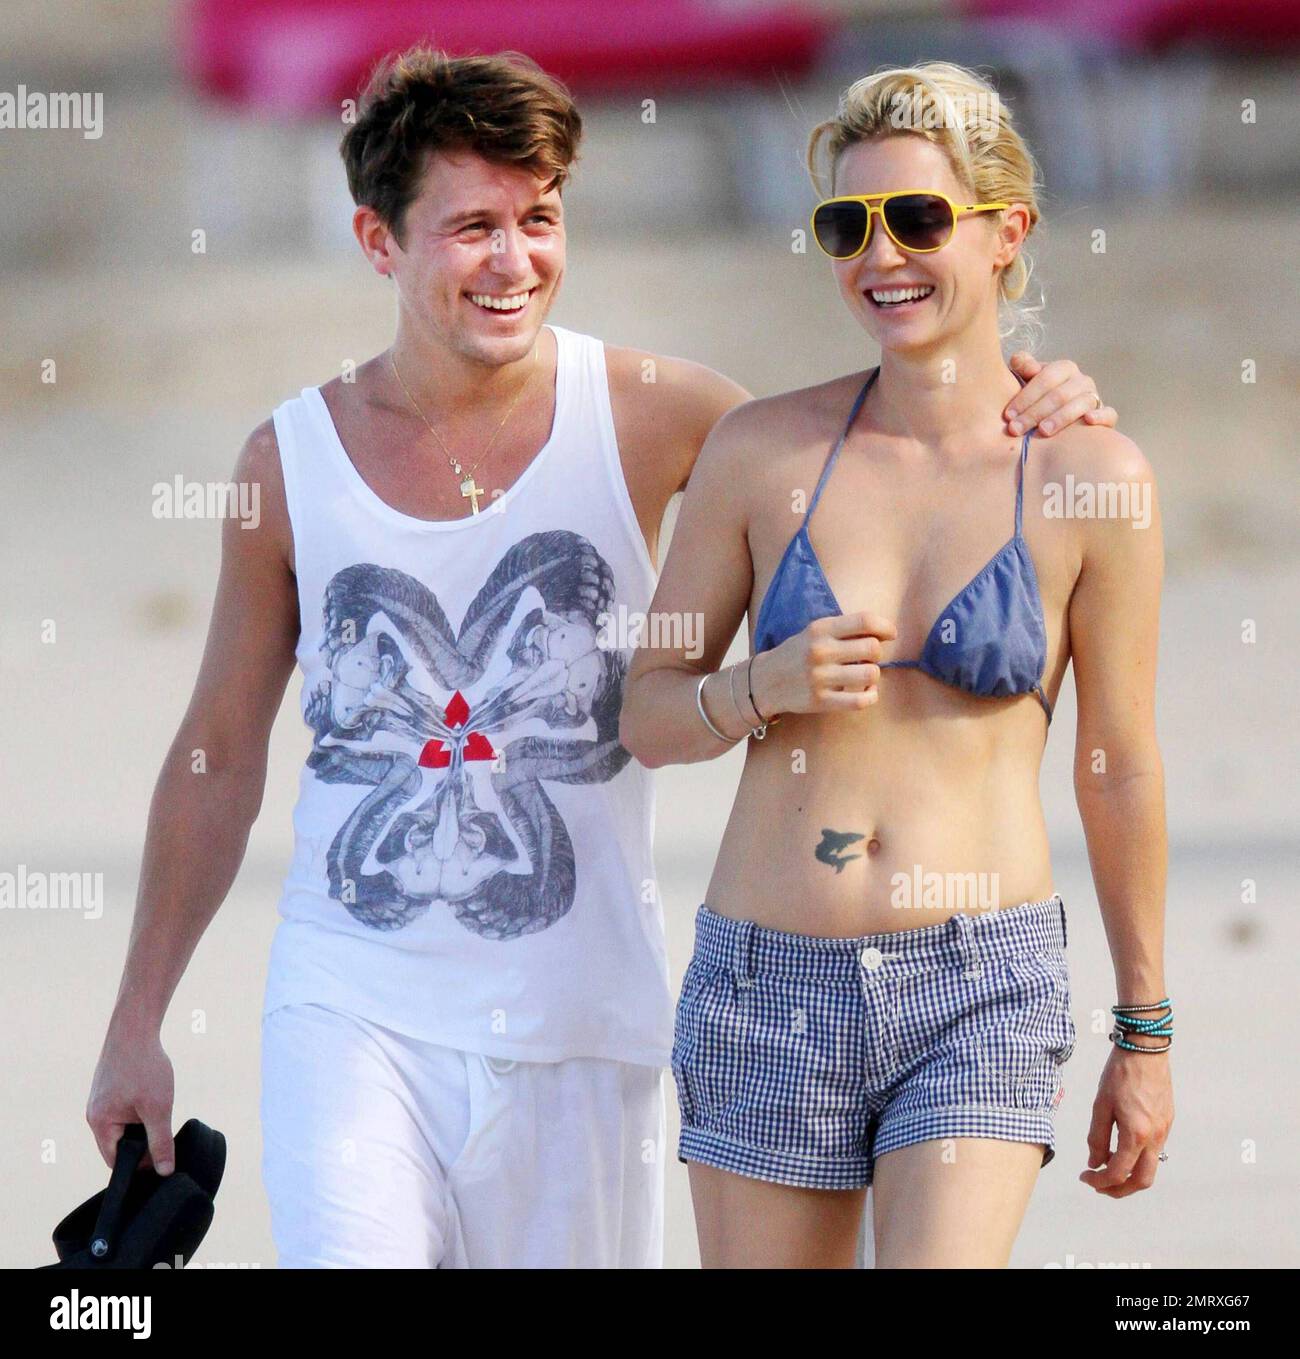 Take That singer Mark Owen and wife Emma Ferguson enjoy a romantic barefoot morning stroll on the beach while continuing their holiday in the Caribbean.  In a white sleeveless shirt and shorts Mark held hands with Emma, clad in tiny shorts and a bikini top, and later wrapped his arm around her shoulders.  Looking very much in love Emma kissed Mark on the shoulder and played with his hair.  Later the pair stopped so Mark could pose for a picture with a young fan. Owen and his fellow Take That band members, Gary Barlow, Howard Donald and Jason Orange, are reportedly on the tropical island to per Stock Photo